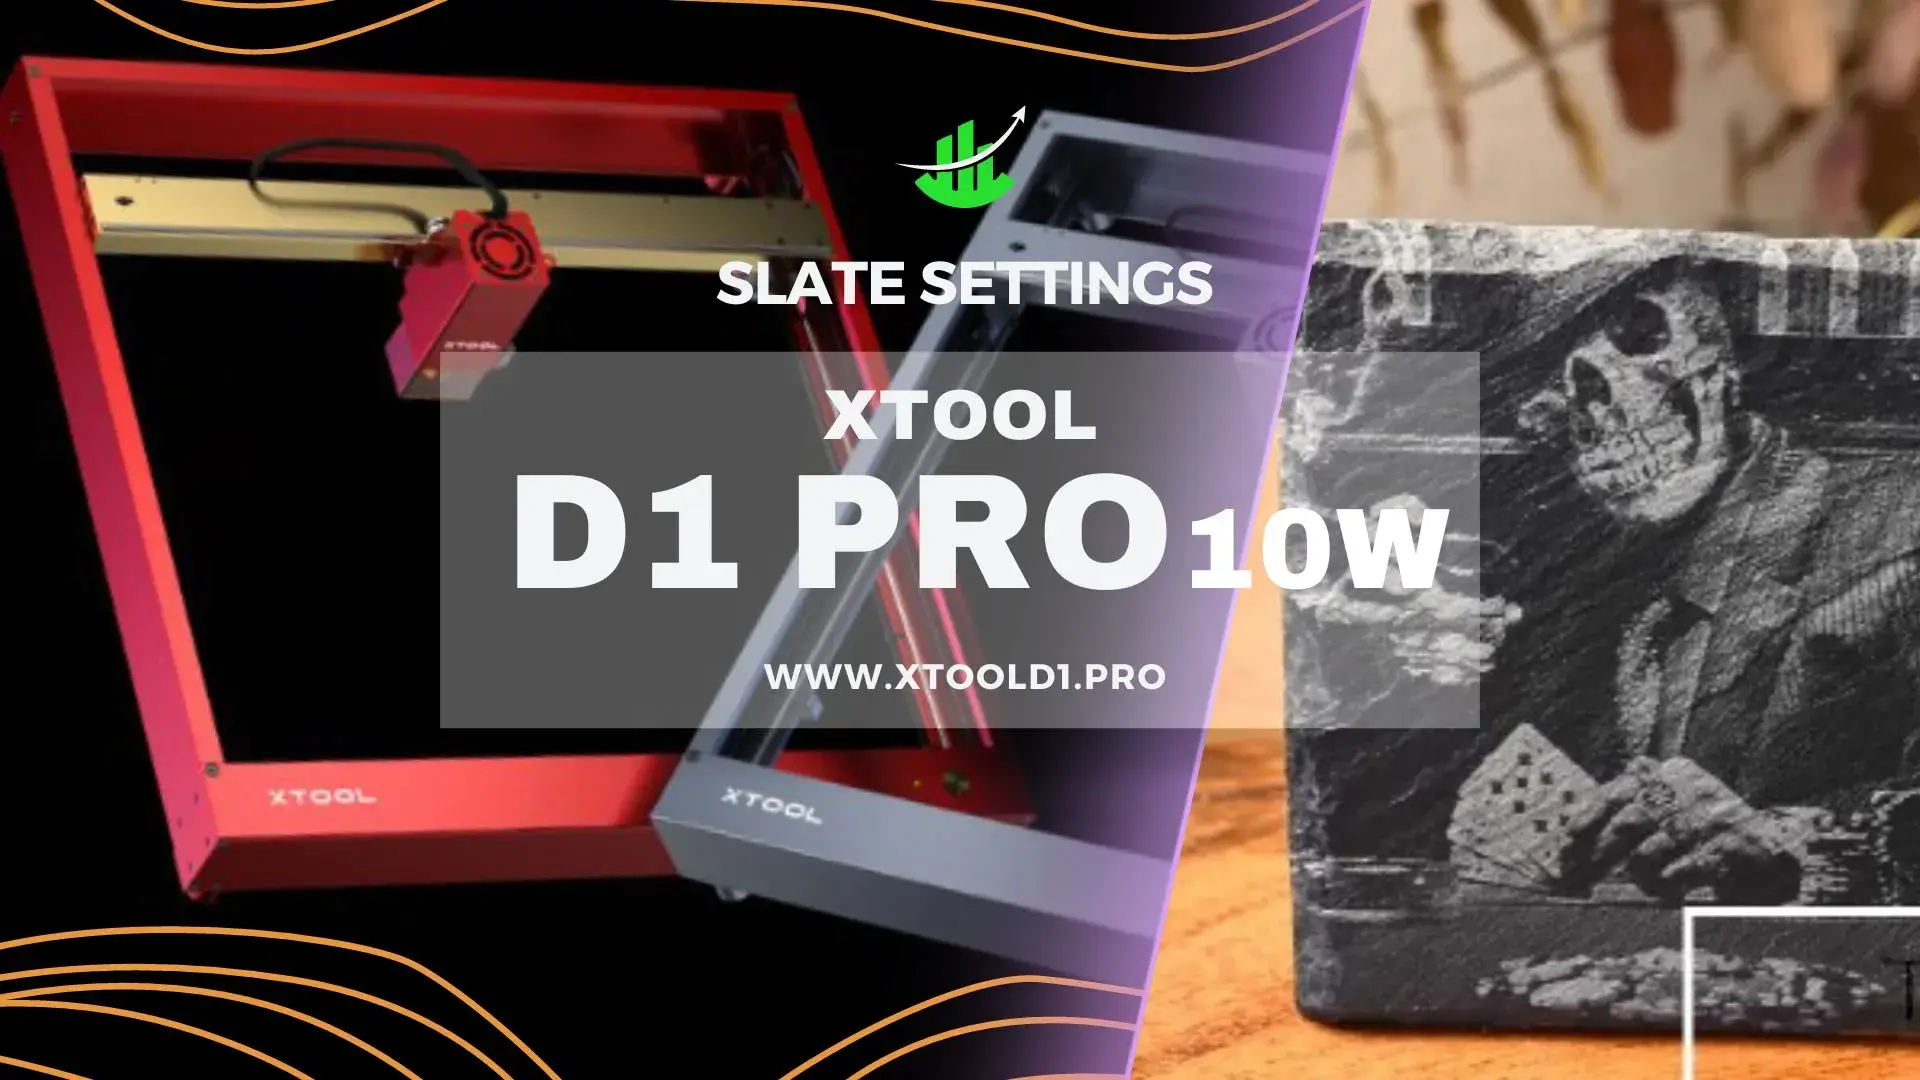 Xtool D1 Pro 10W: Your Ultimate Slate Settings Guide!